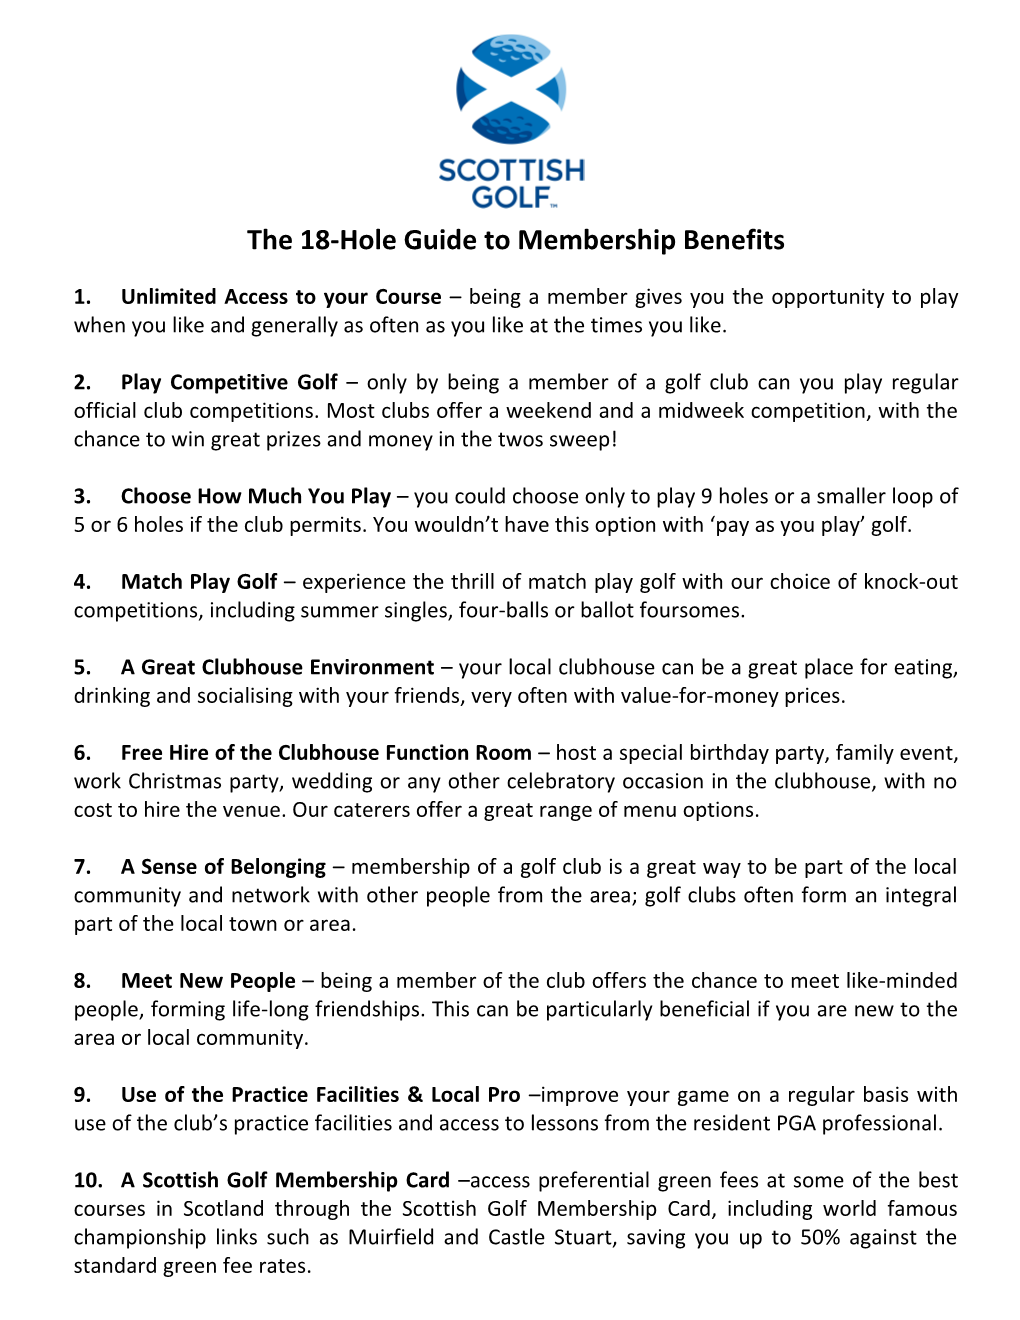 The 18-Hole Guide to Membership Benefits